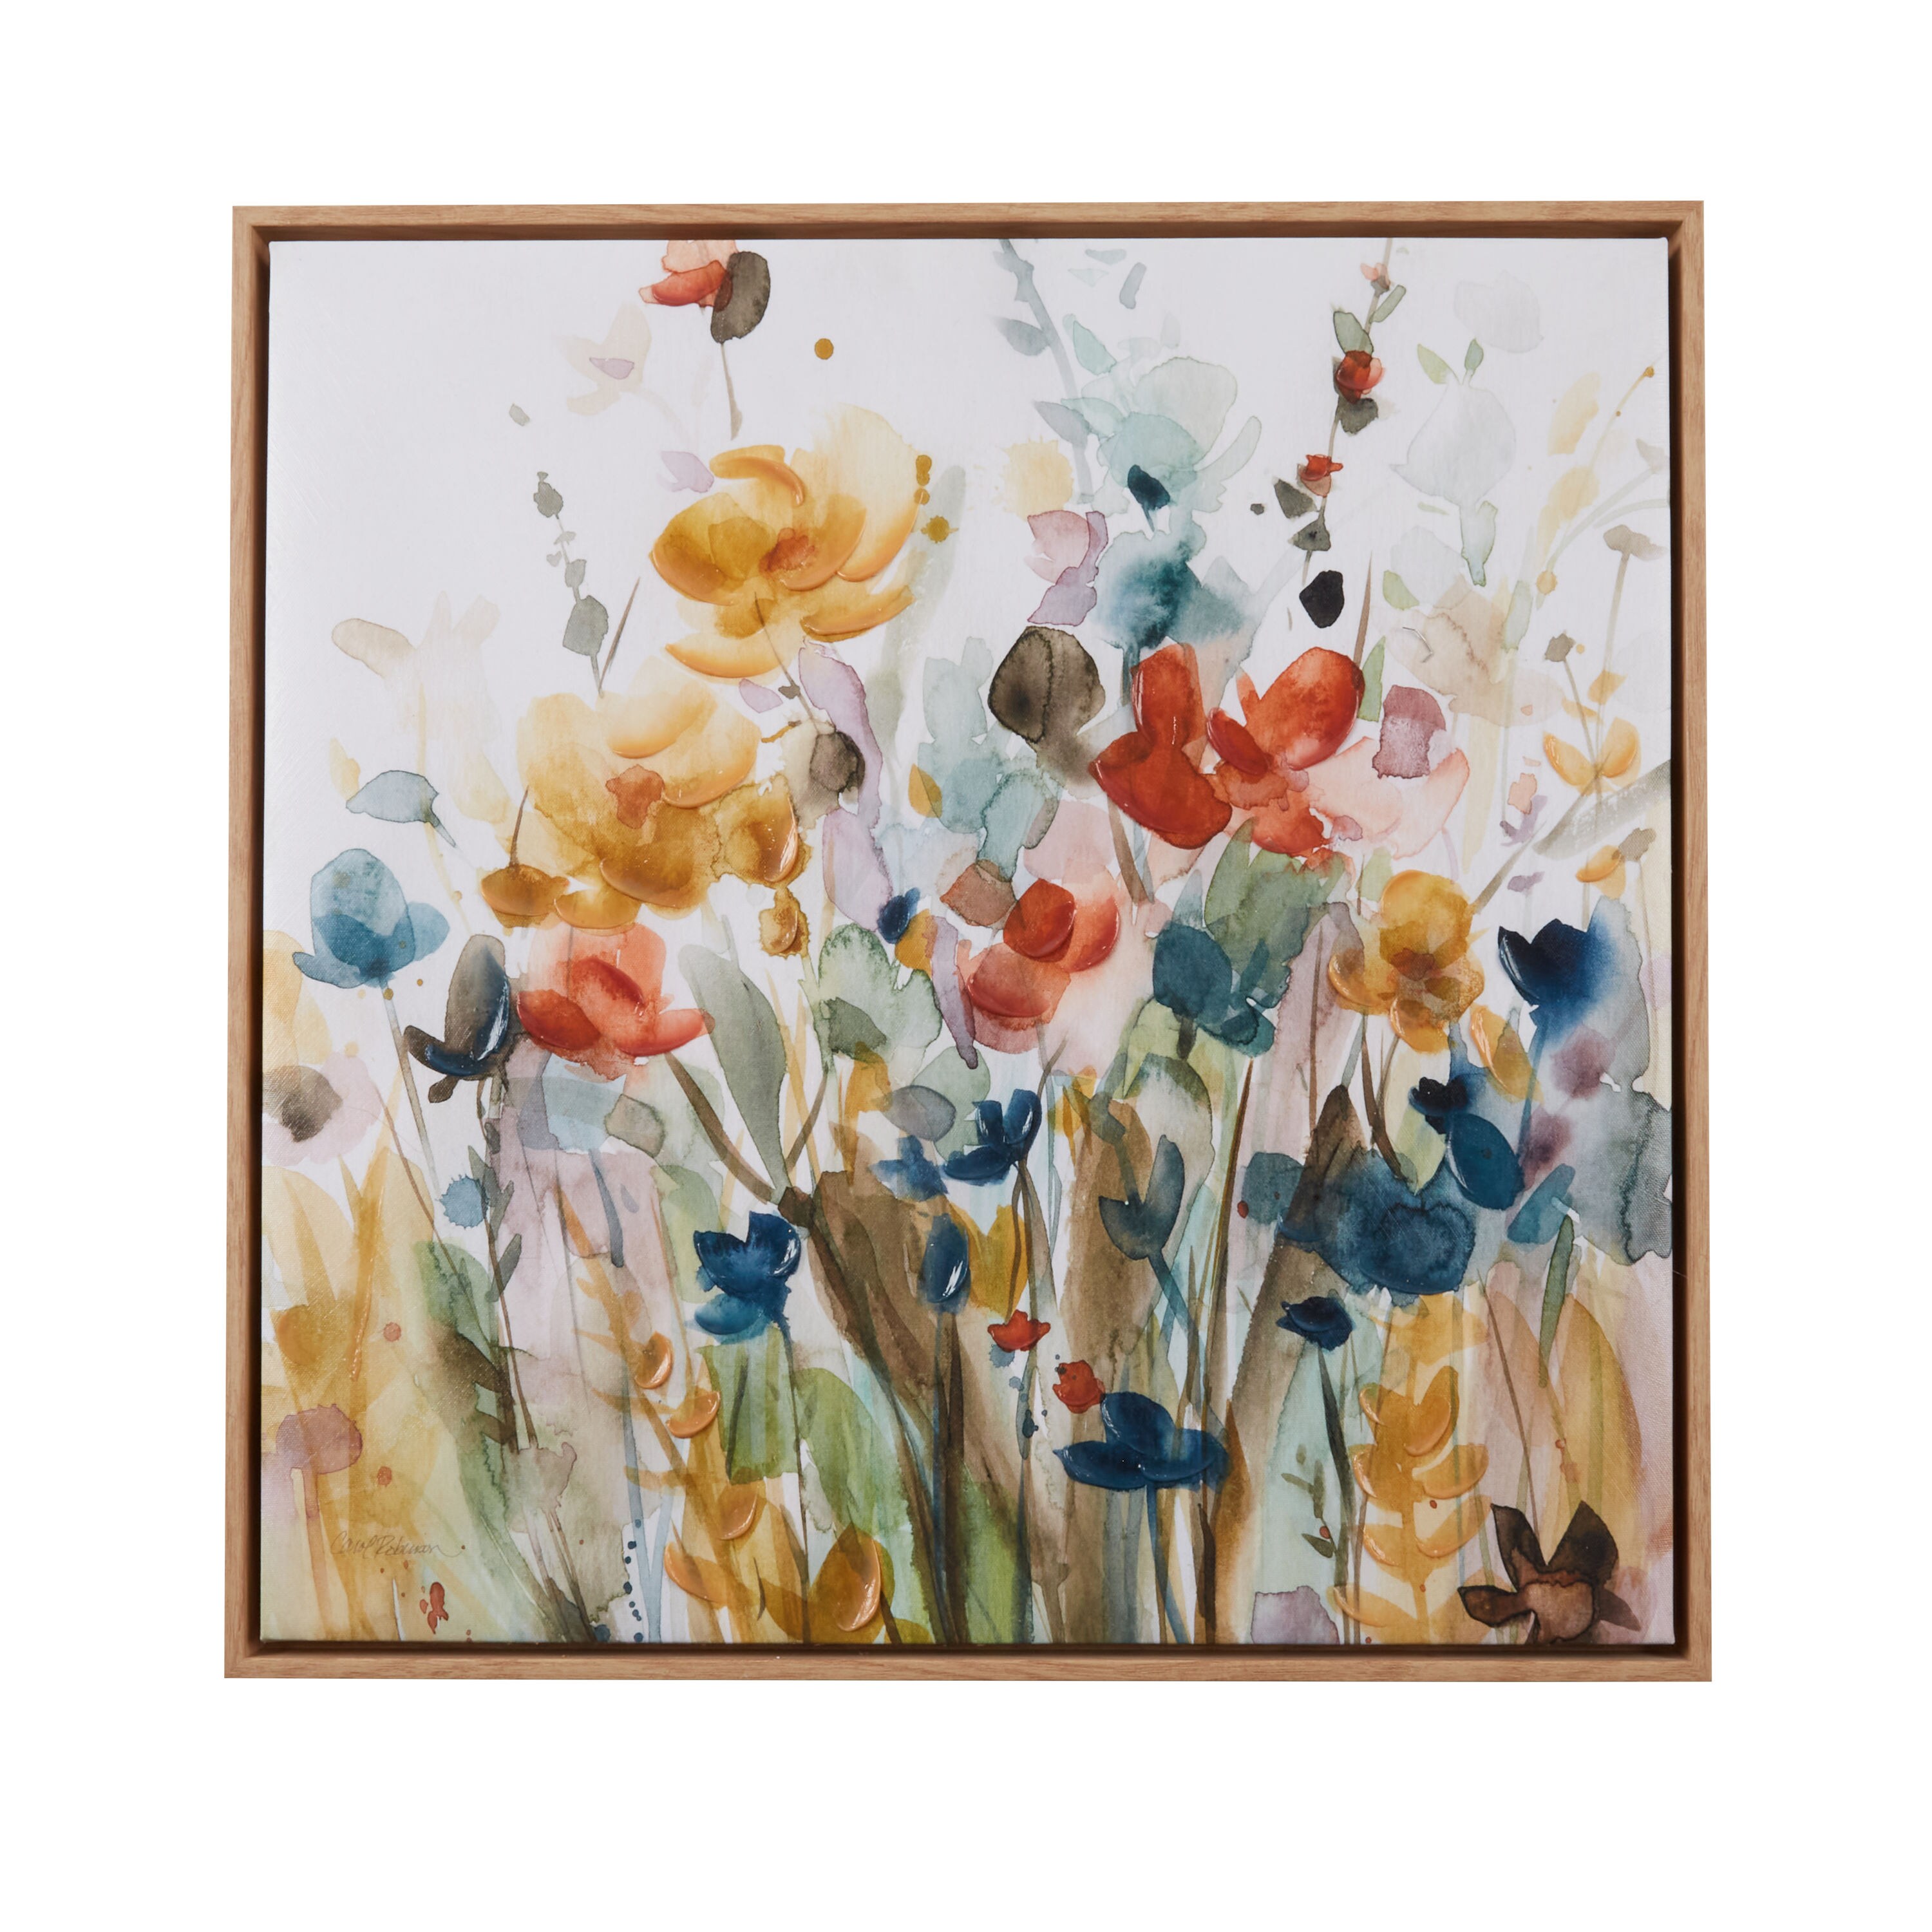 Stupell Industries Blooming Protea Floral Bouquet Watercolor Flower Still Life 16 x 20 Design by Melissa Wang White Framed Wall Art